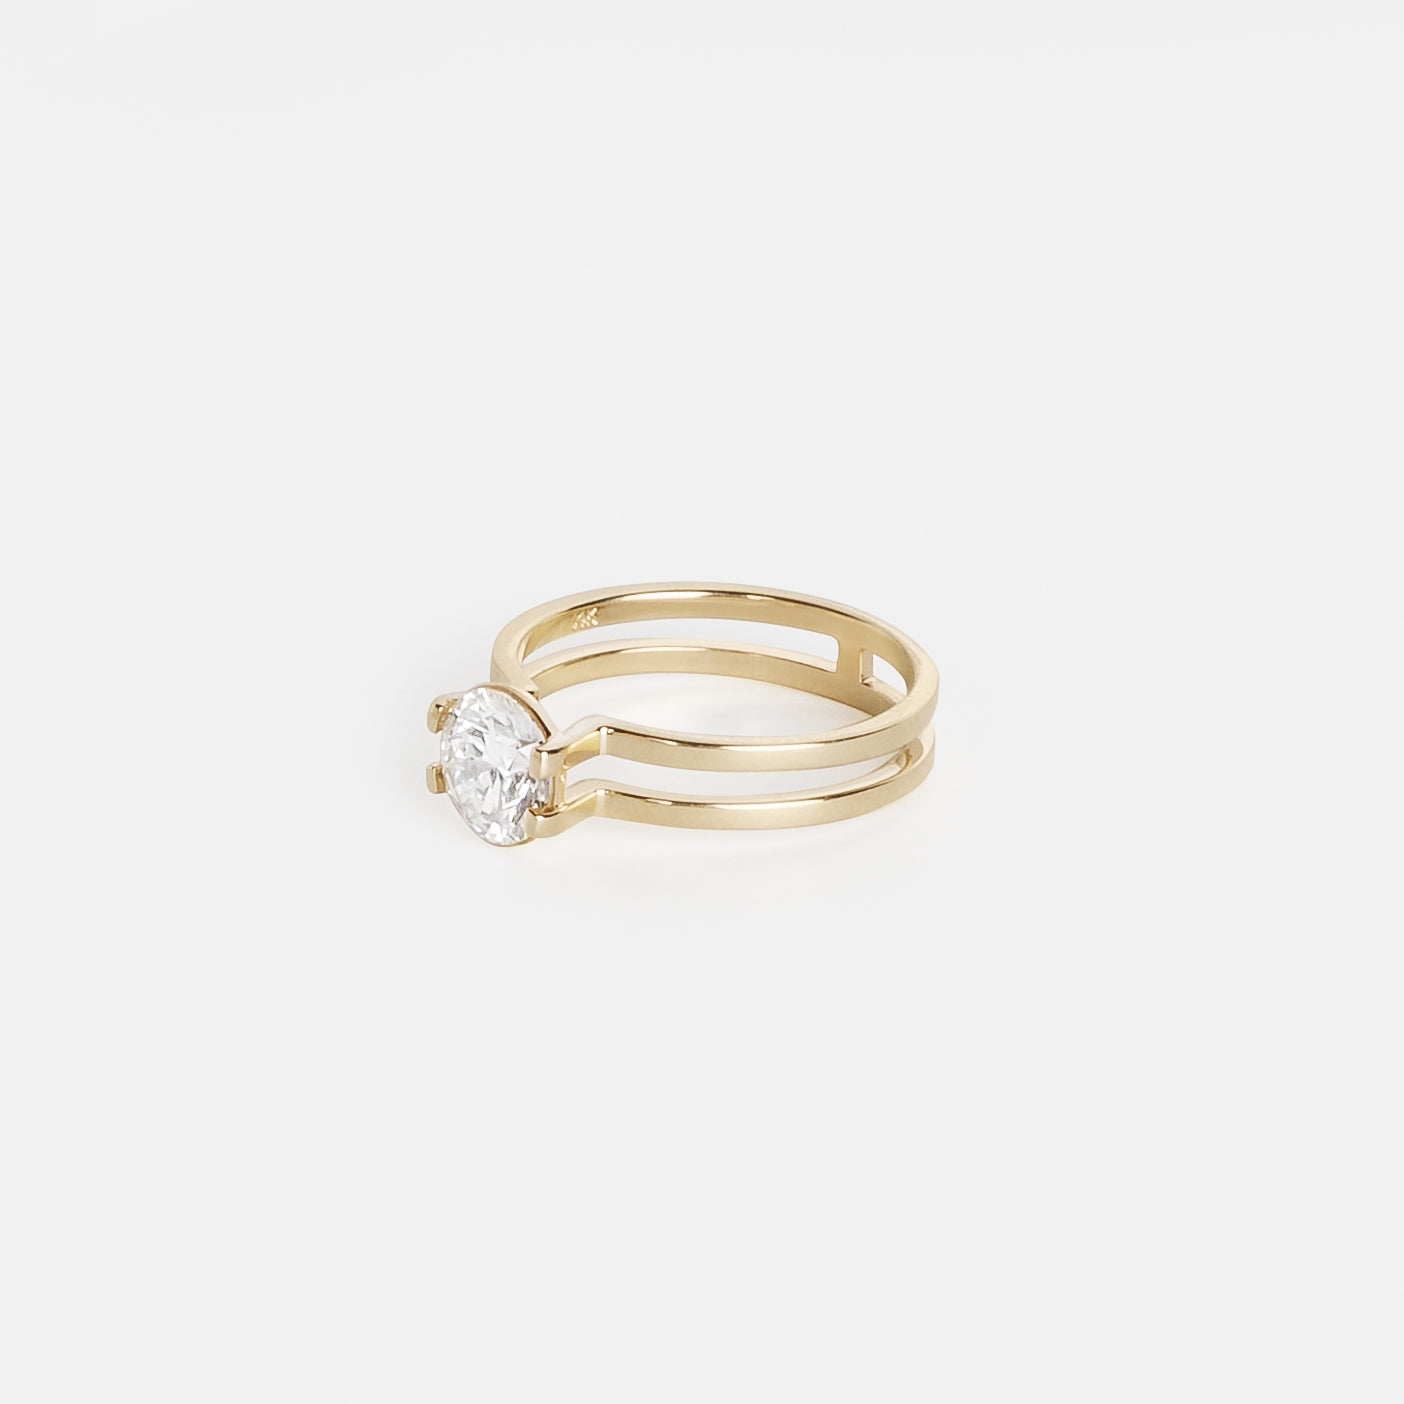 Vedi Cool Ring in 14k Gold set with a 1.01ct round brilliant cut natural diamond By SHW Fine Jewelry NYC